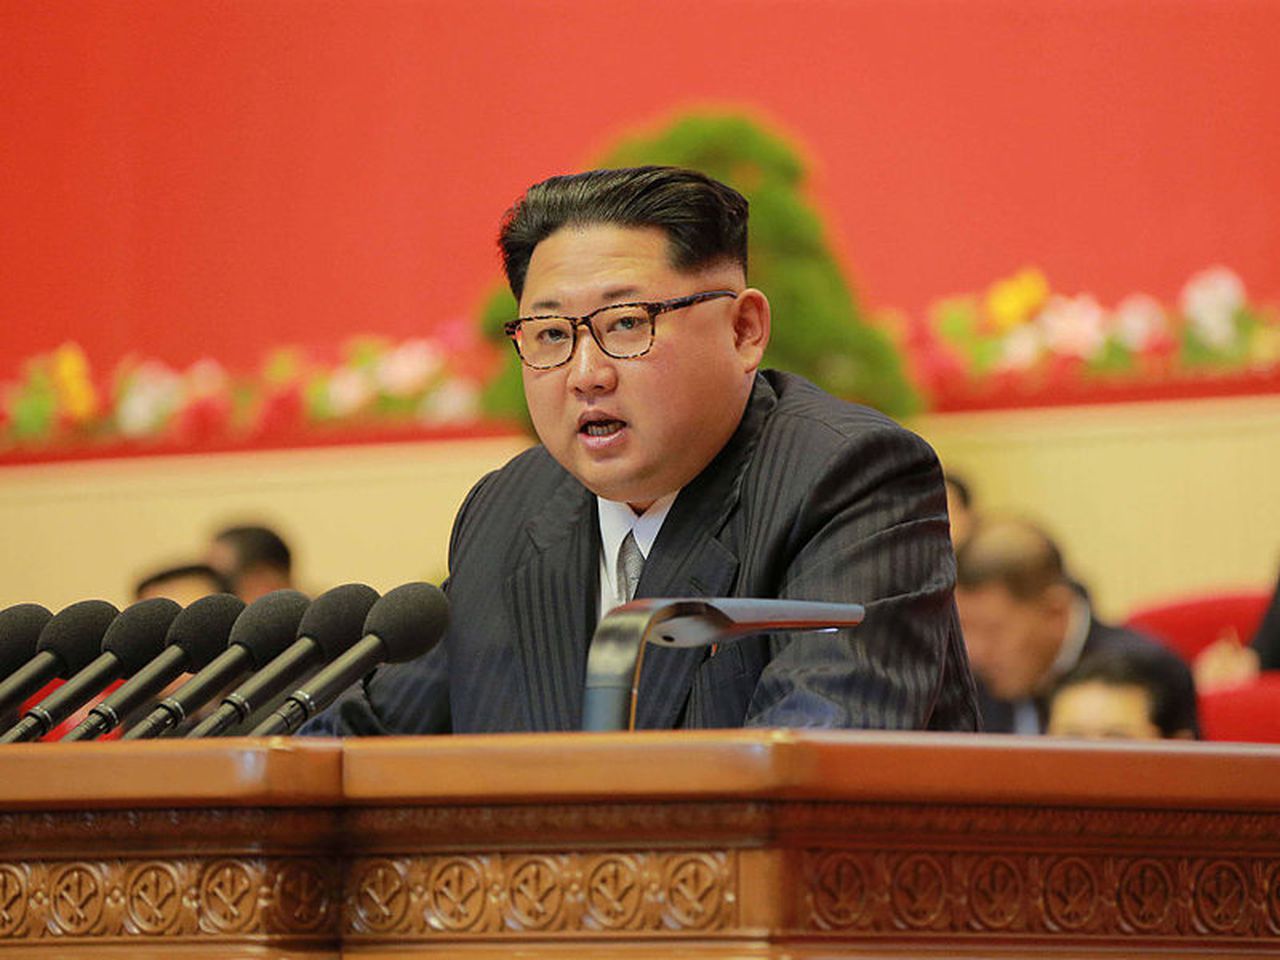 North Korea also said that the US was hostile to them, image via Getty Images